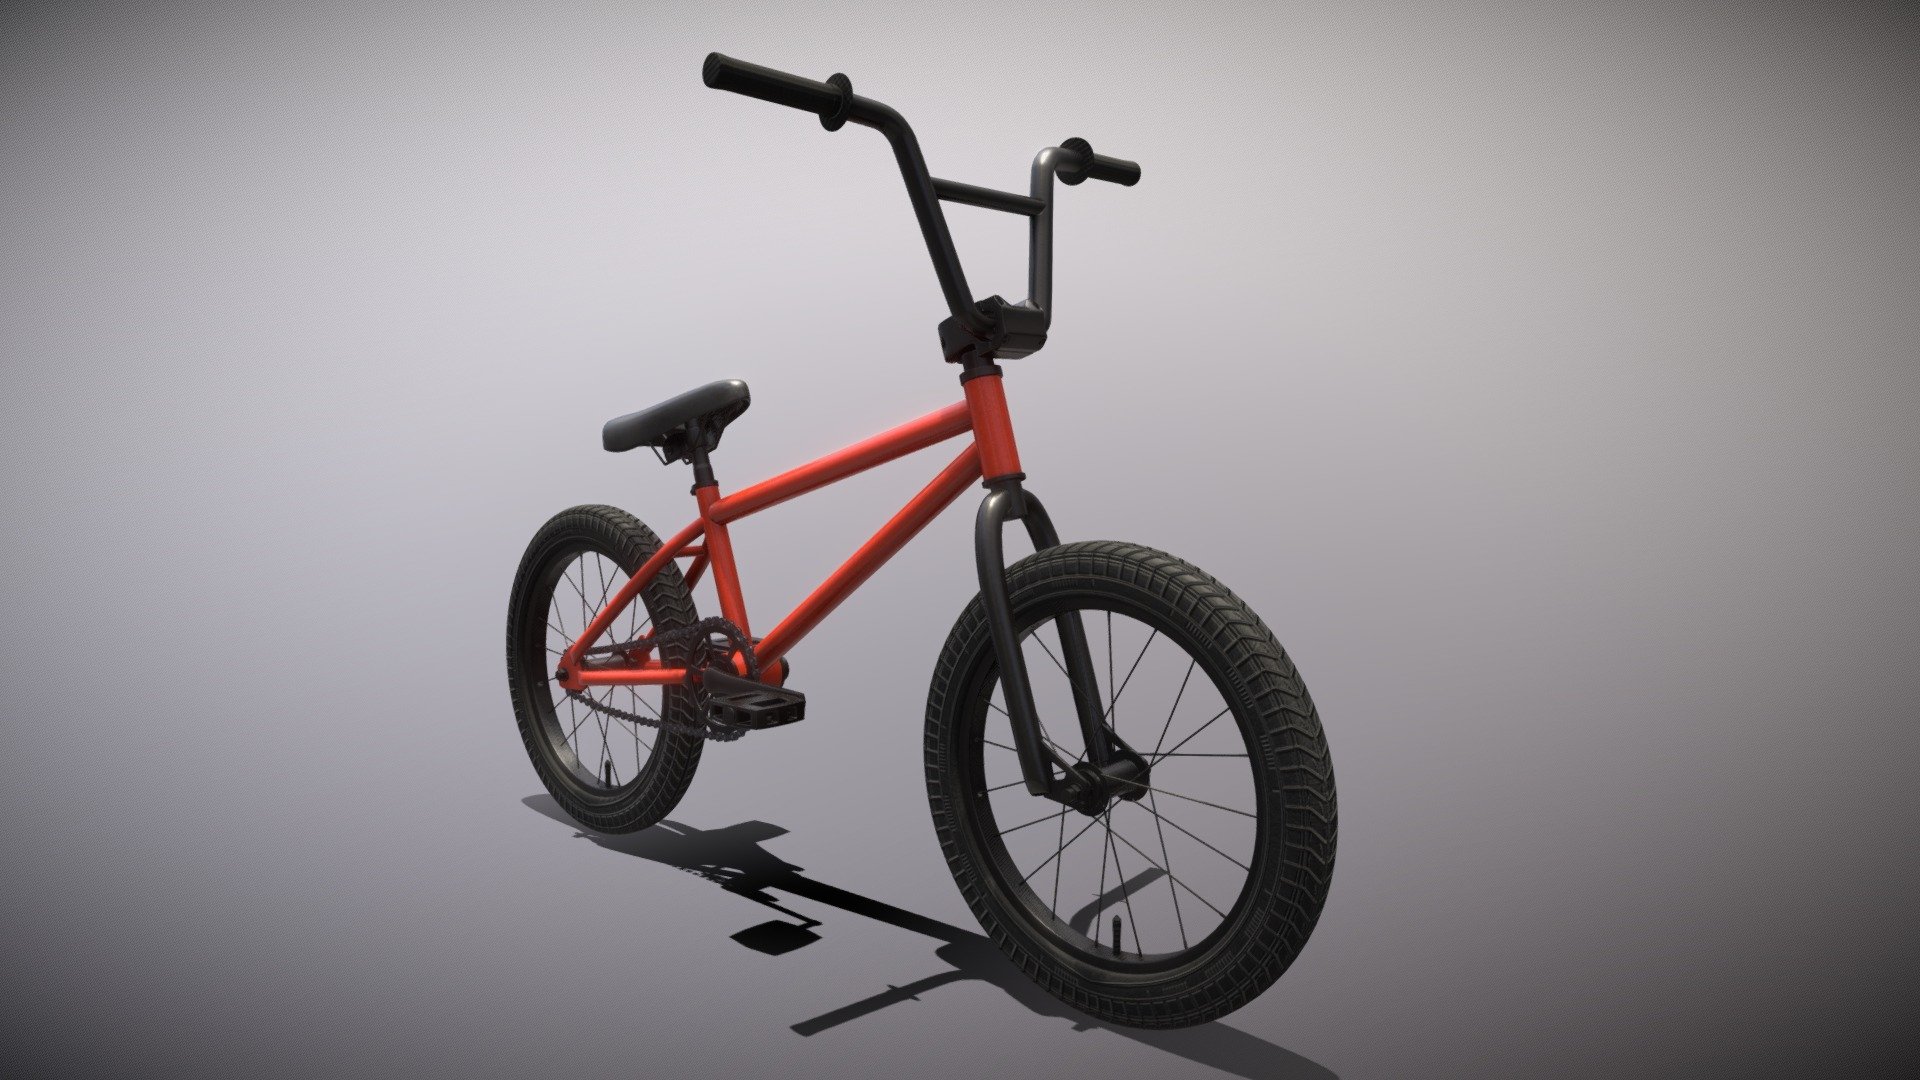 A high resolution 3d model of Freestyle BMX natively created in Autodesk Maya (2019 version).
This model has clean mesh with excellent details.

Thanks for checking out my models 3d model